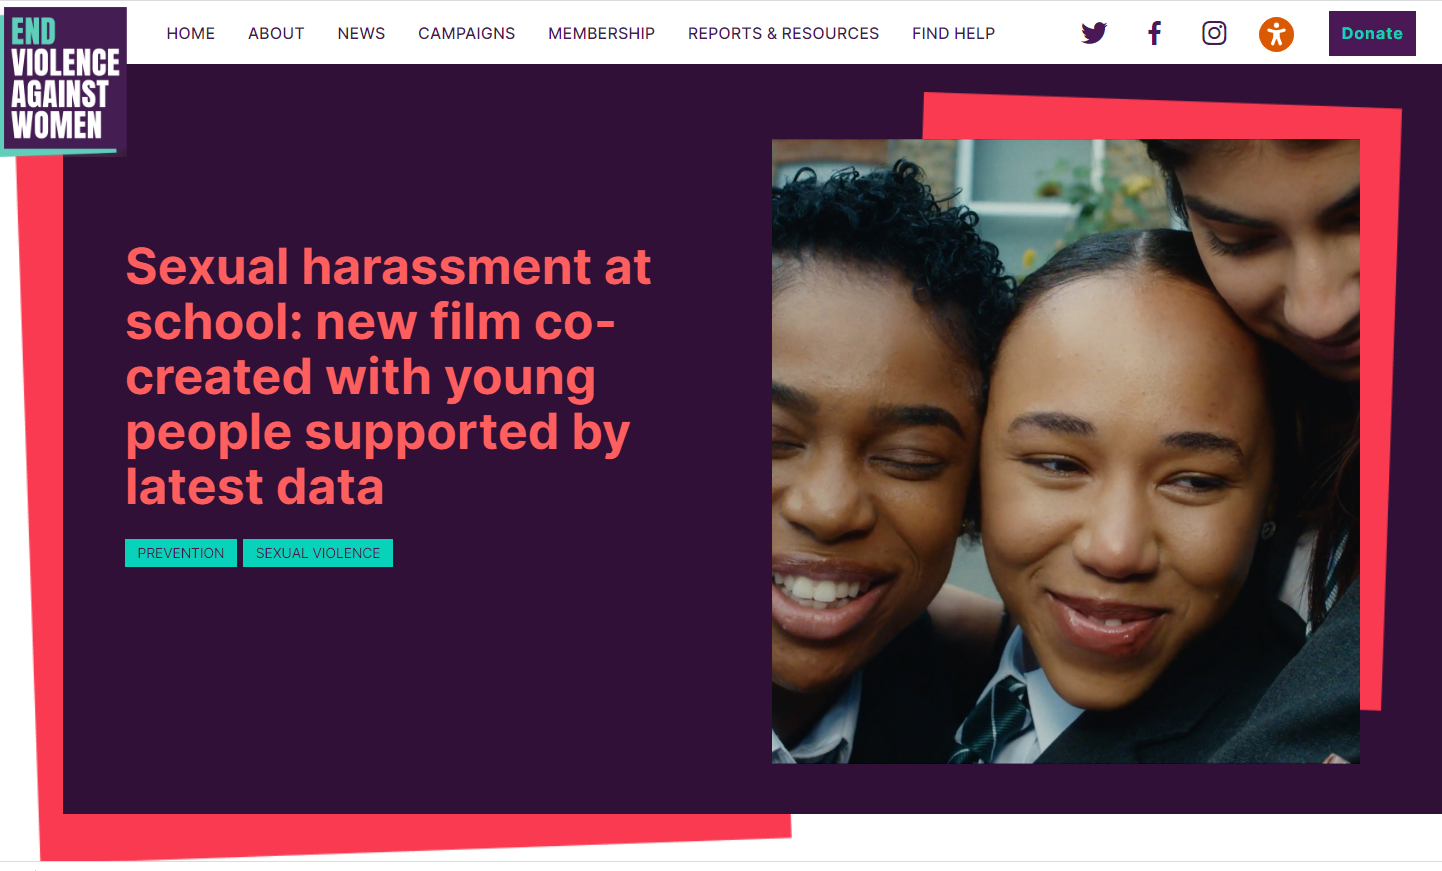 Sexual harassment at school: new film co-created with young people supported by latest data